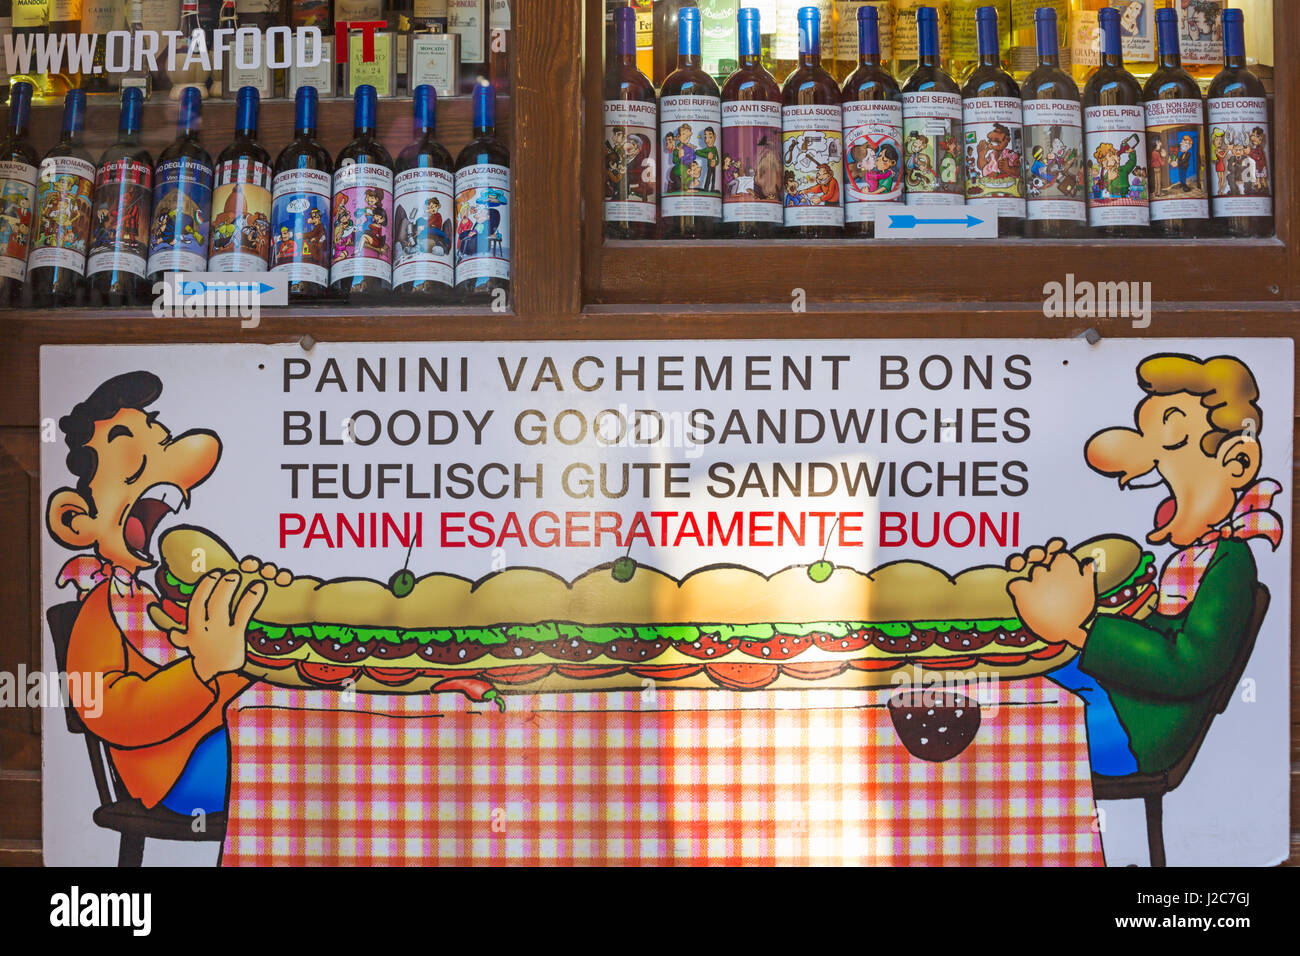 Bloody good sandwiches sign and bottles of wine with funny labels on display in shop at Orta San Giulio, Lake Orta, Italy in April Stock Photo